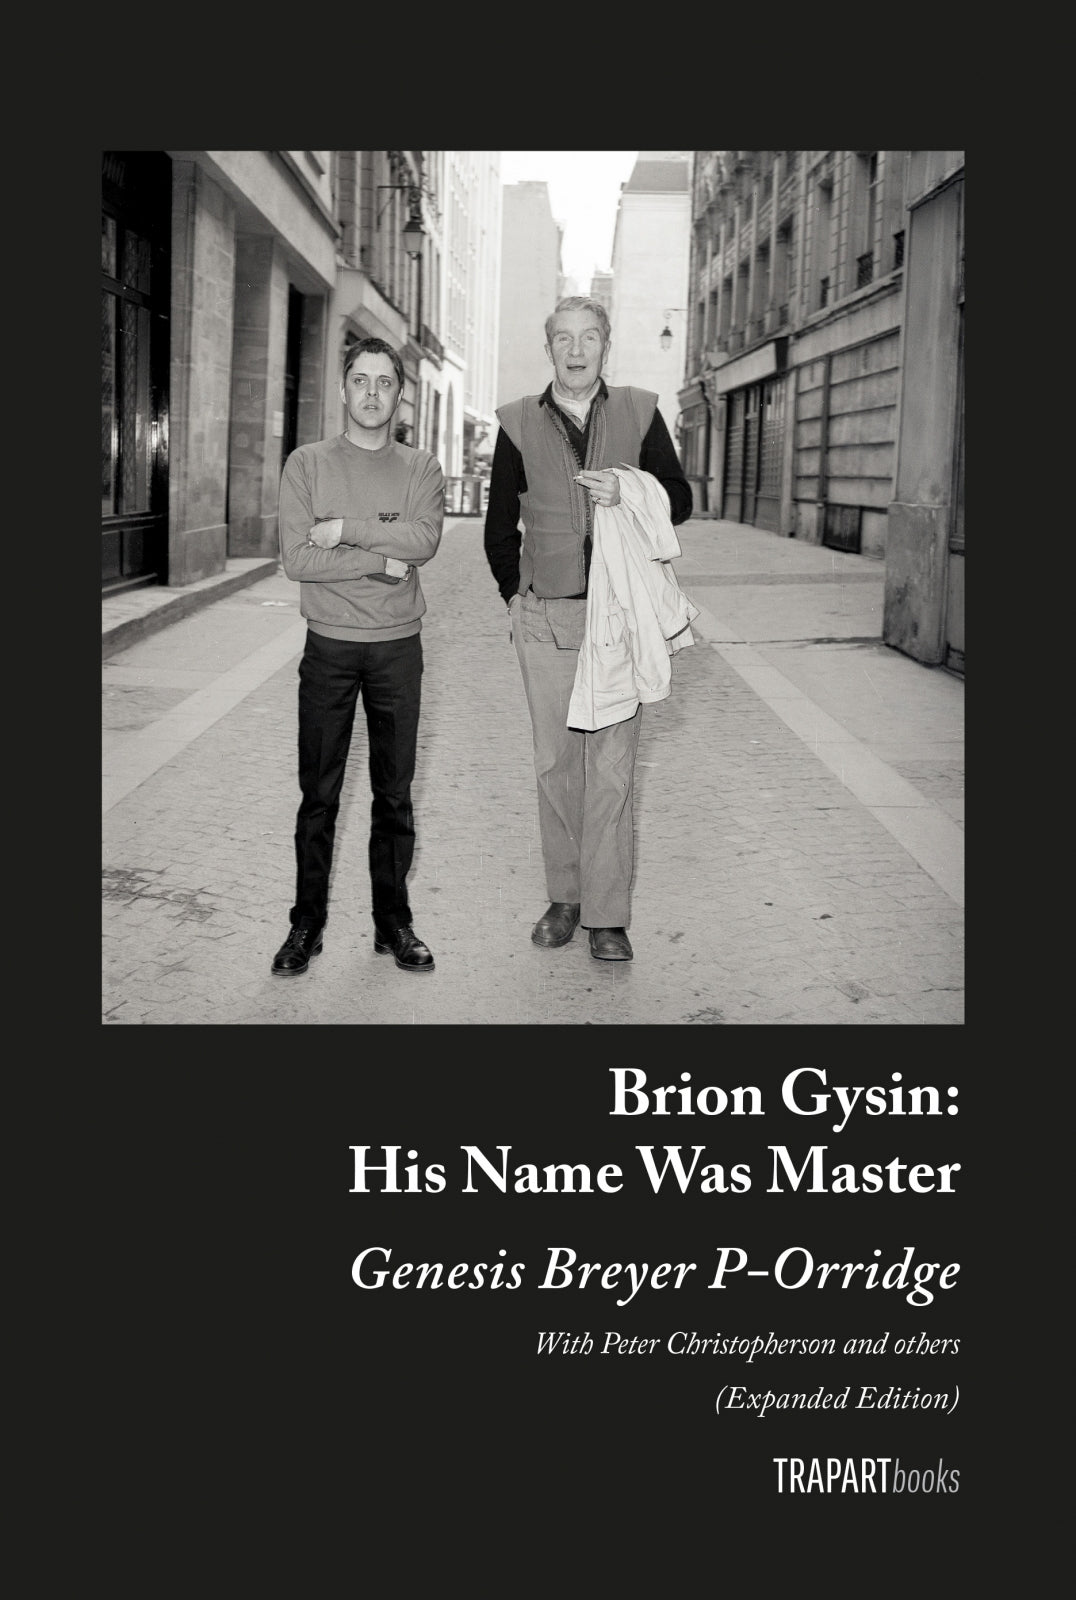 Brion Gysin: His Name Was Master